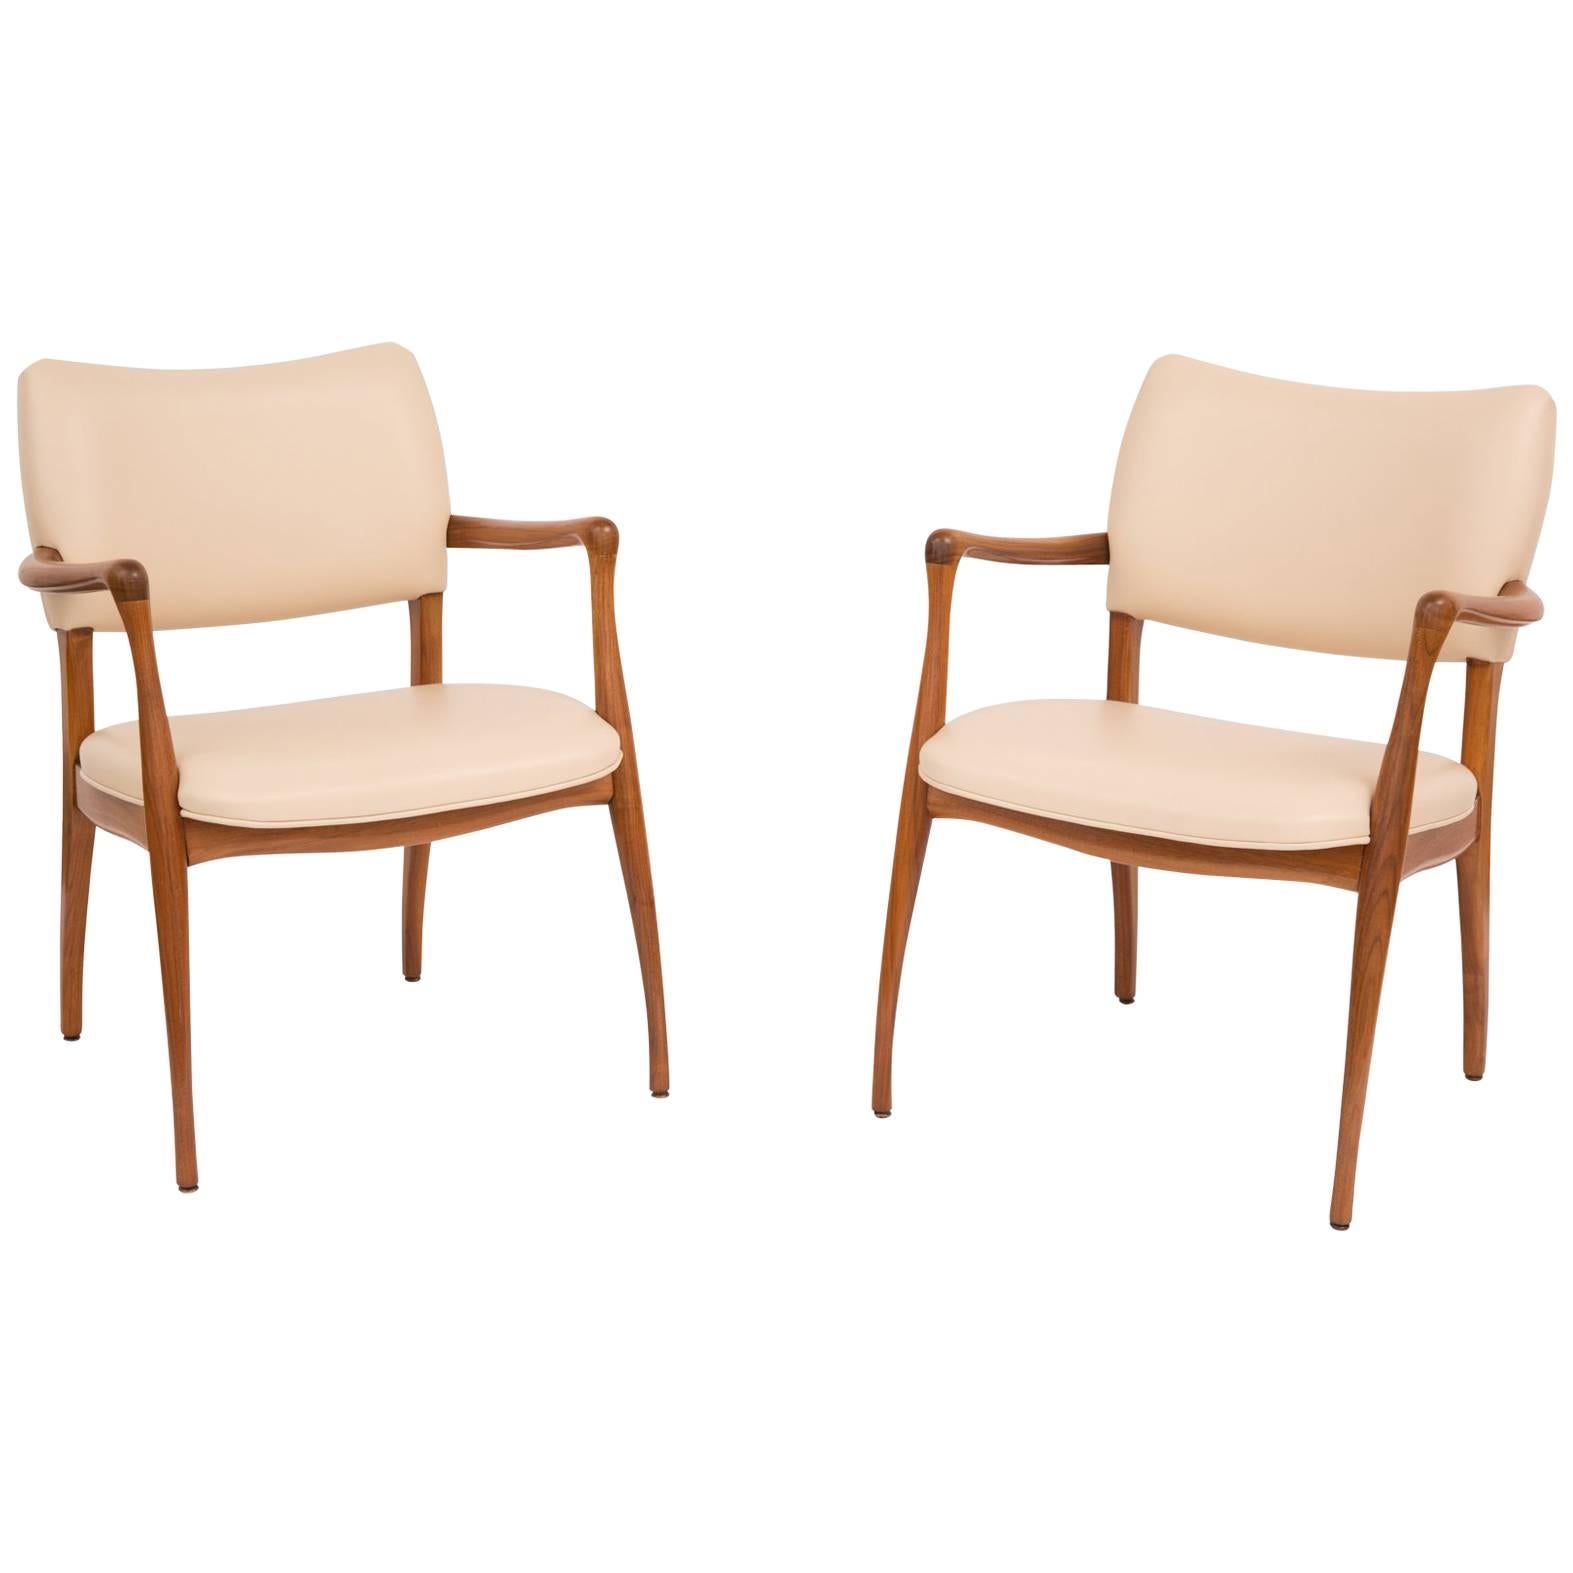 Sculptural Pair of Walnut and Leather Armchairs